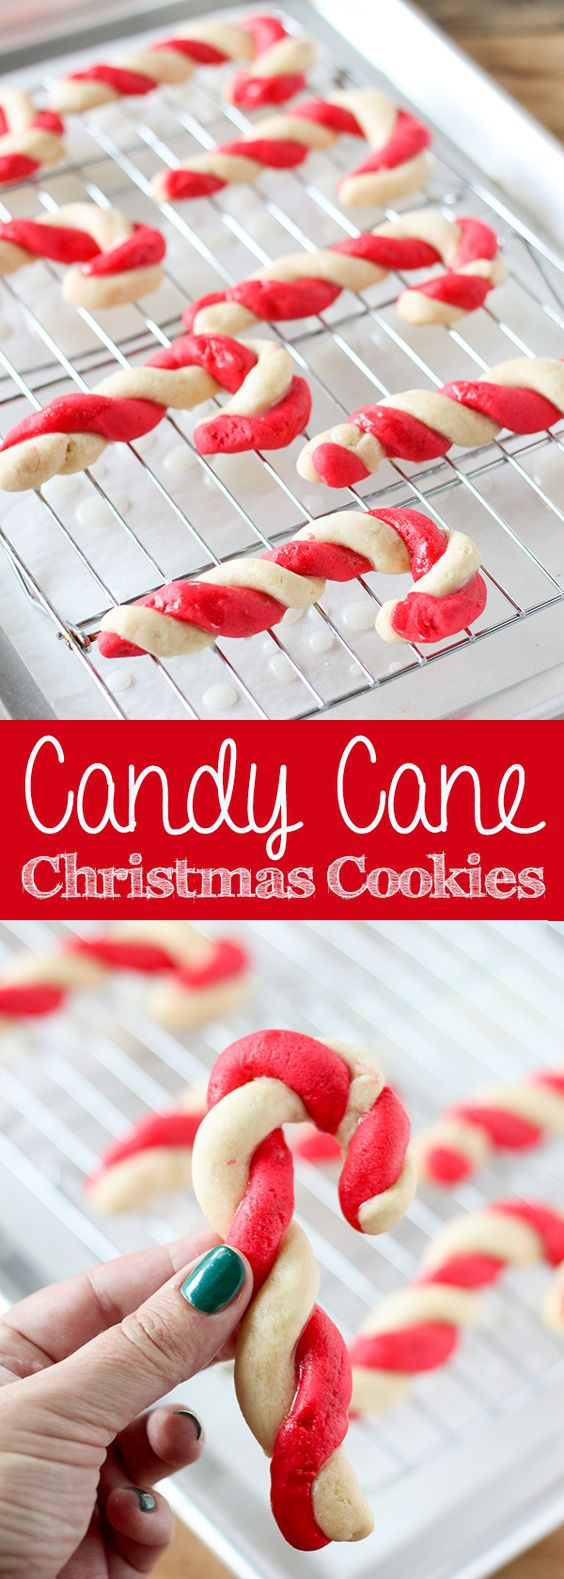 Christmas Candy Cane Cookies
 Pinterest • The world’s catalog of ideas